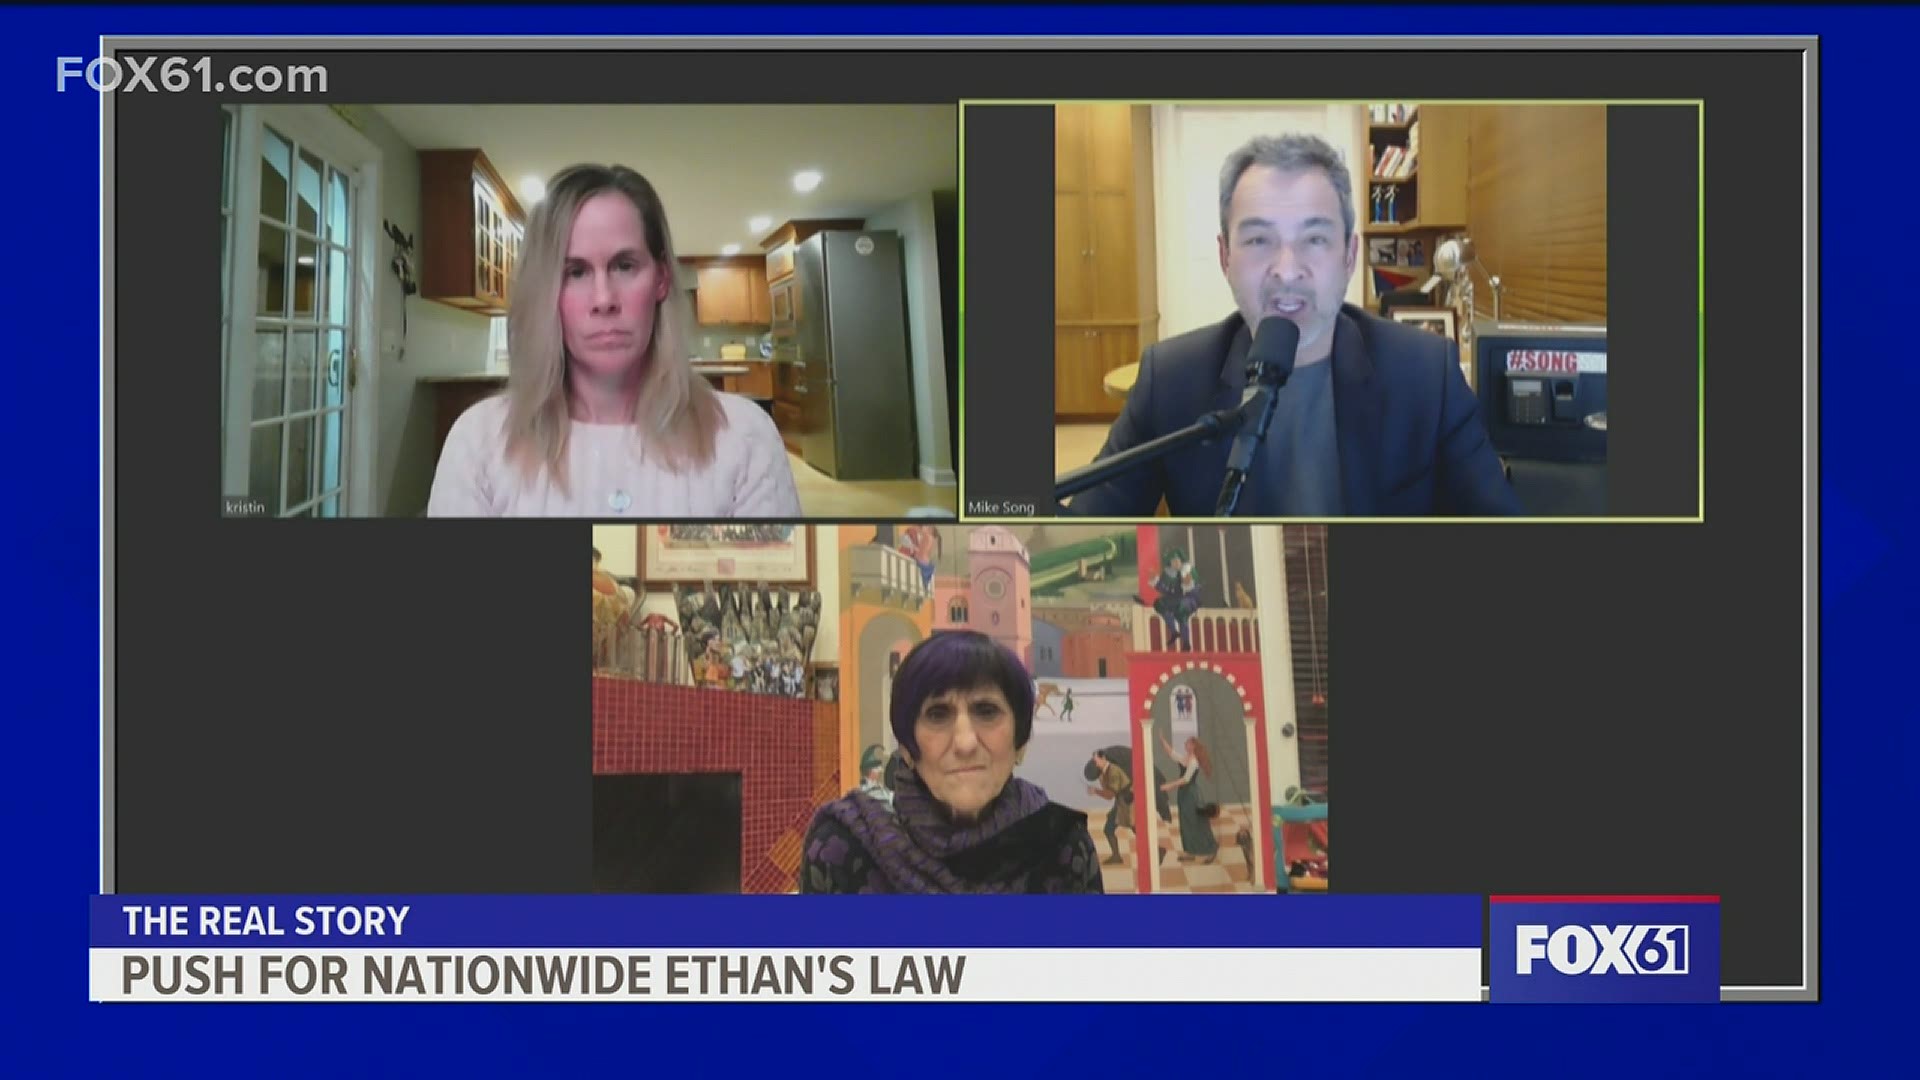 Mike and Kristin Song discuss their efforts to get Ethan's Law passed in Washington, DC. Congresswoman Rosa DeLauro joins the conversation.